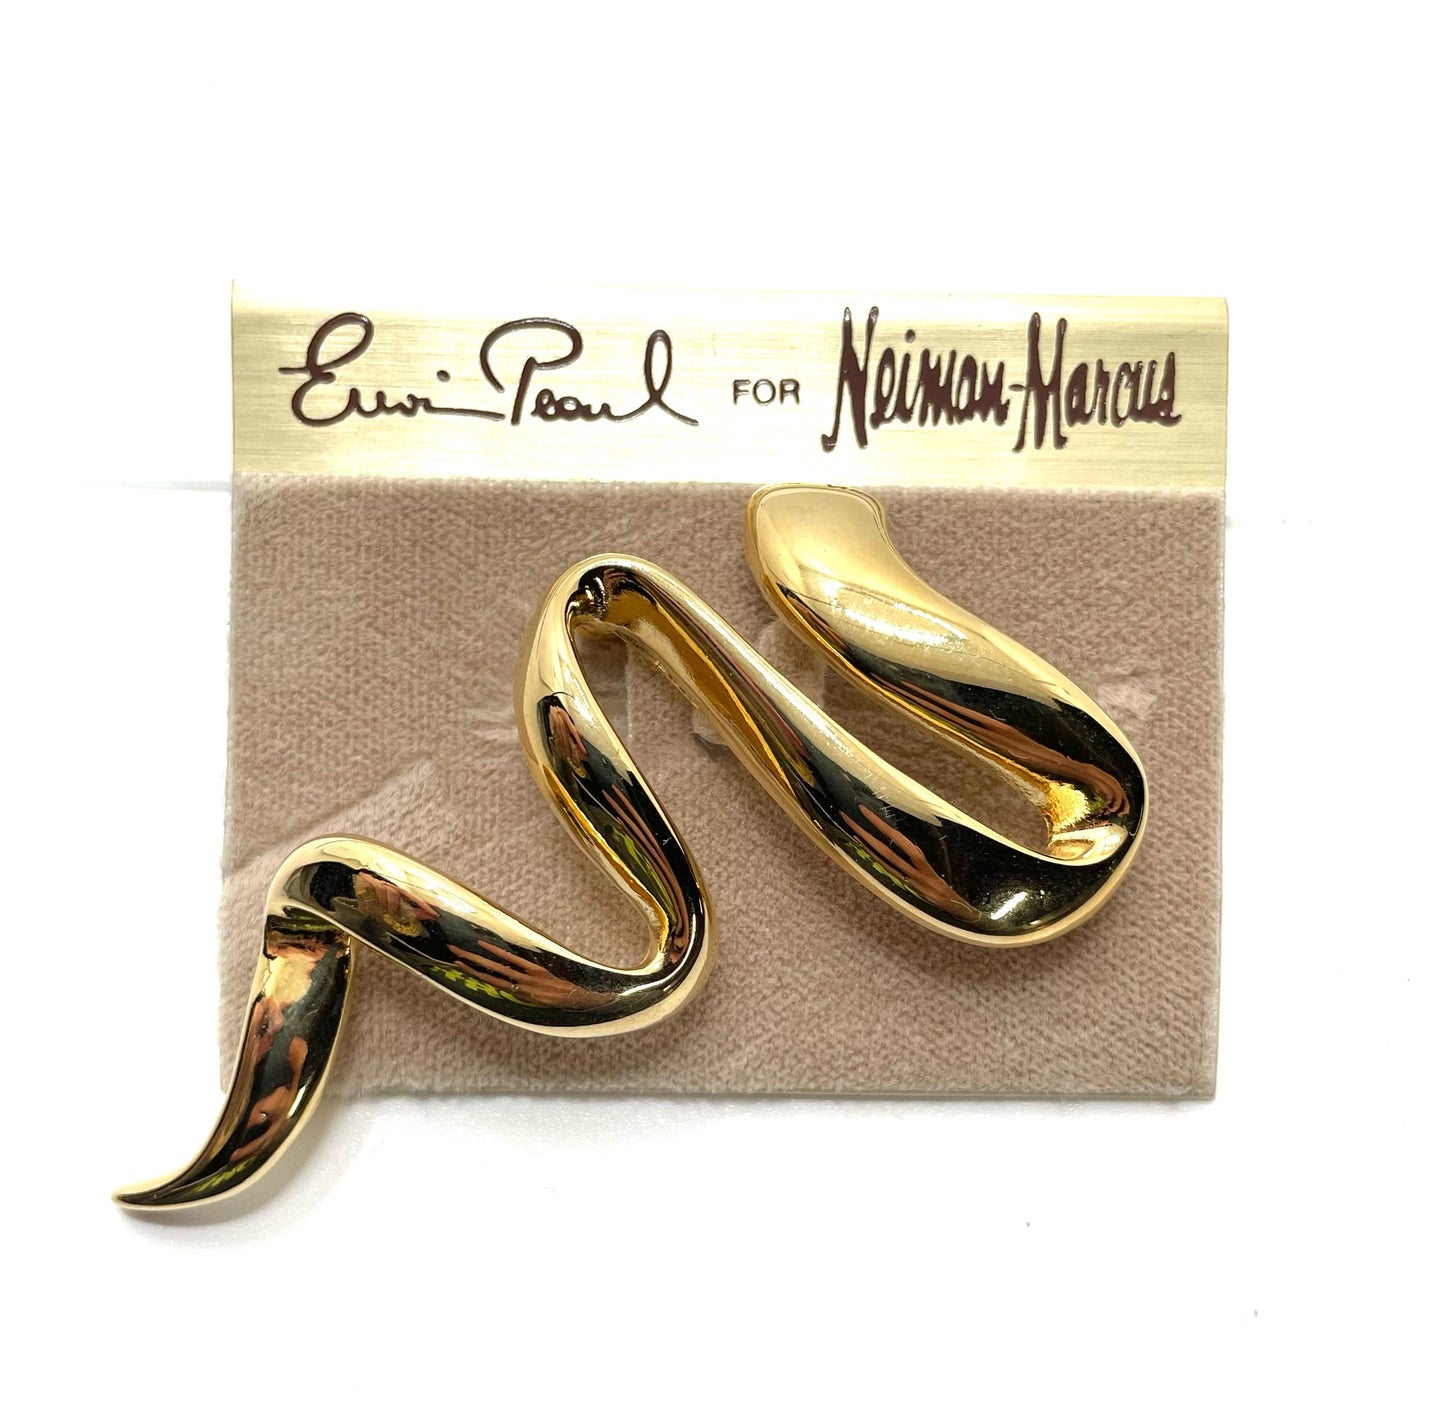 Vintage Erwin Pearl for Neiman Marcus Gold Pin